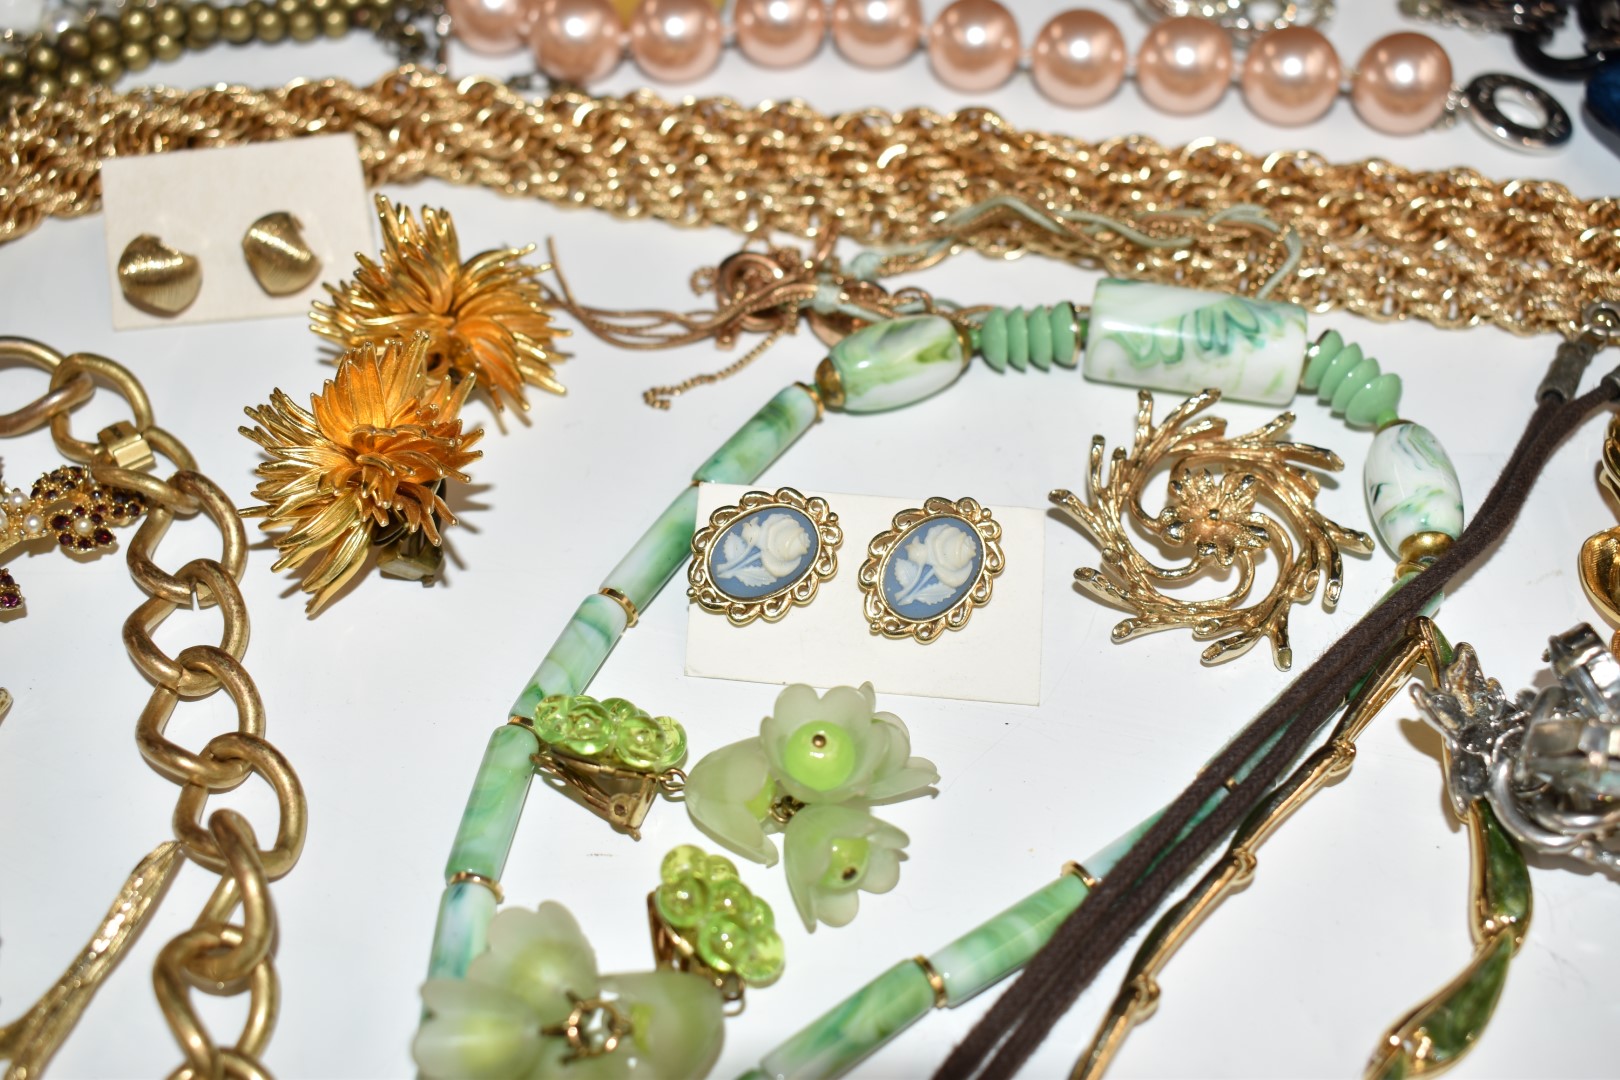 A collection of named costume jewellery including Avon, Napier, Sarah Coventry, Monet, Hollywood, - Image 19 of 19